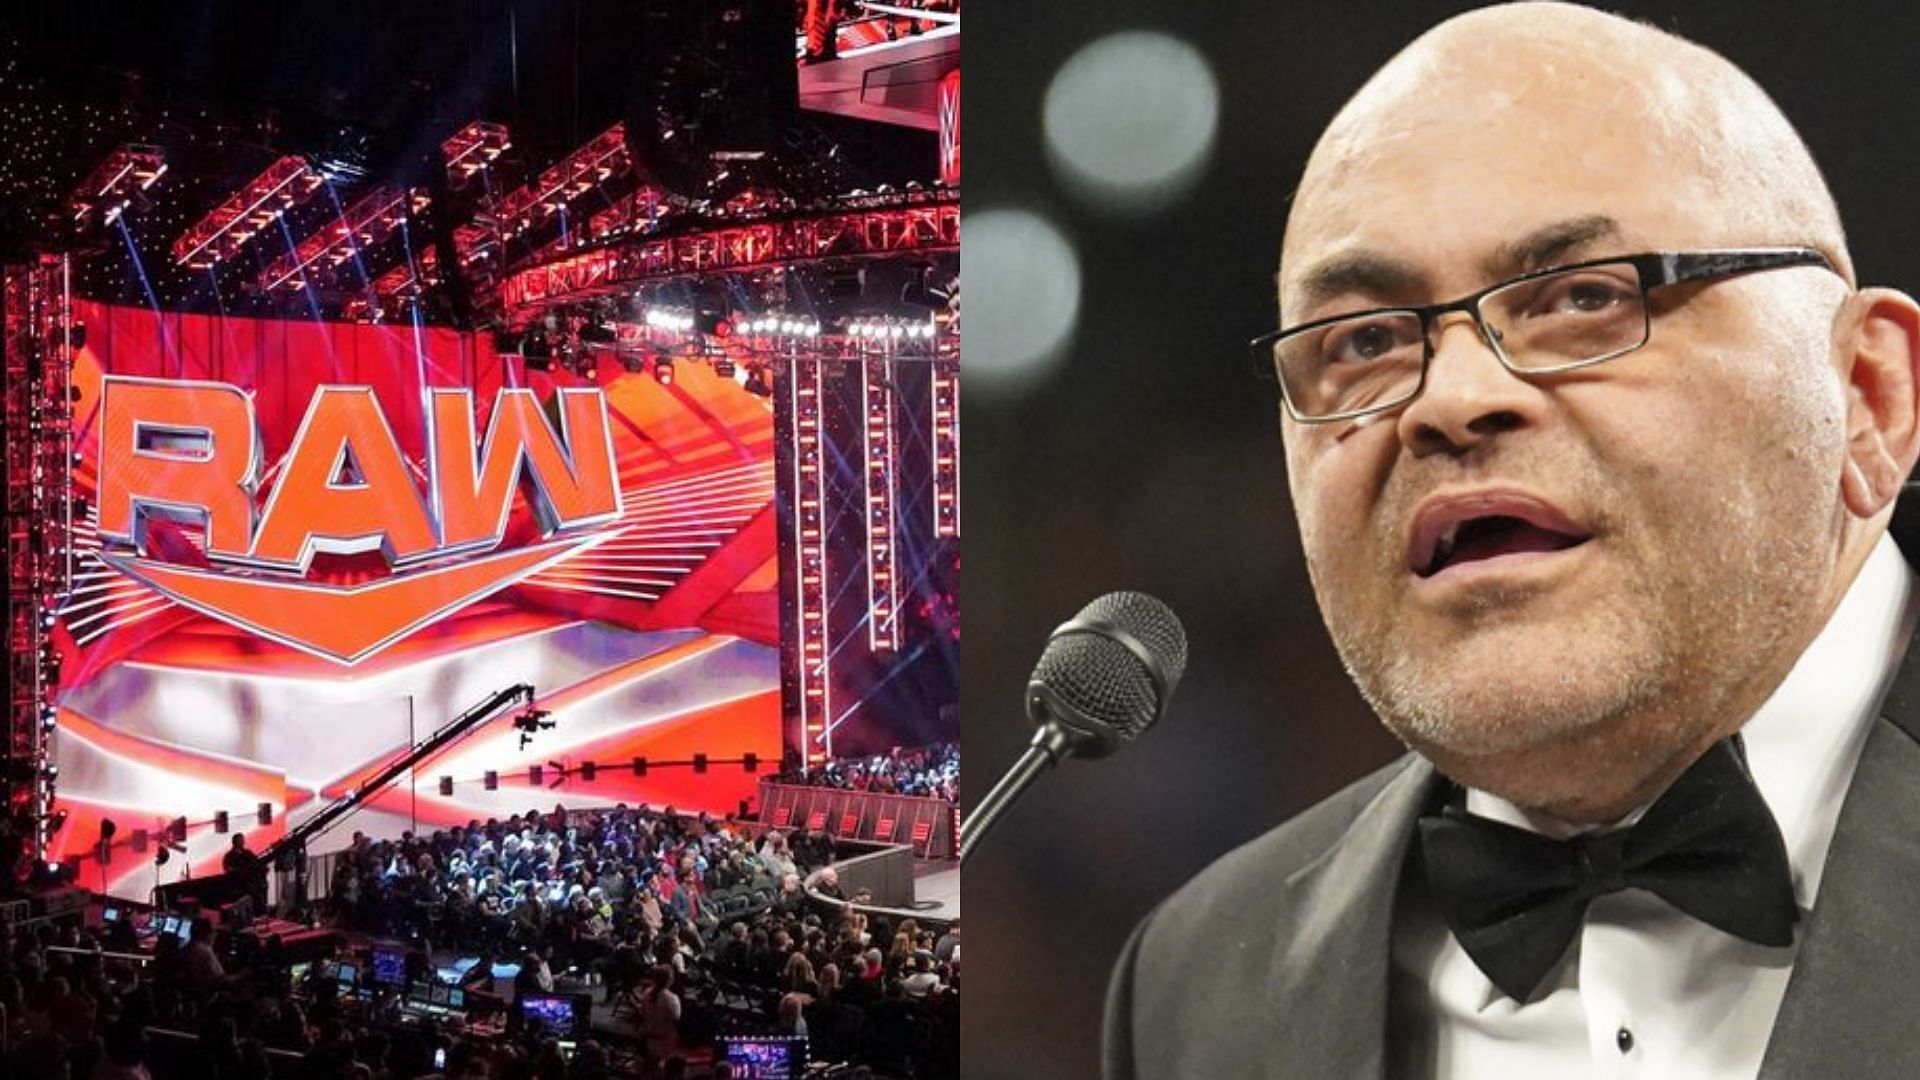 WWE RAW stage (left), Konnan (right)